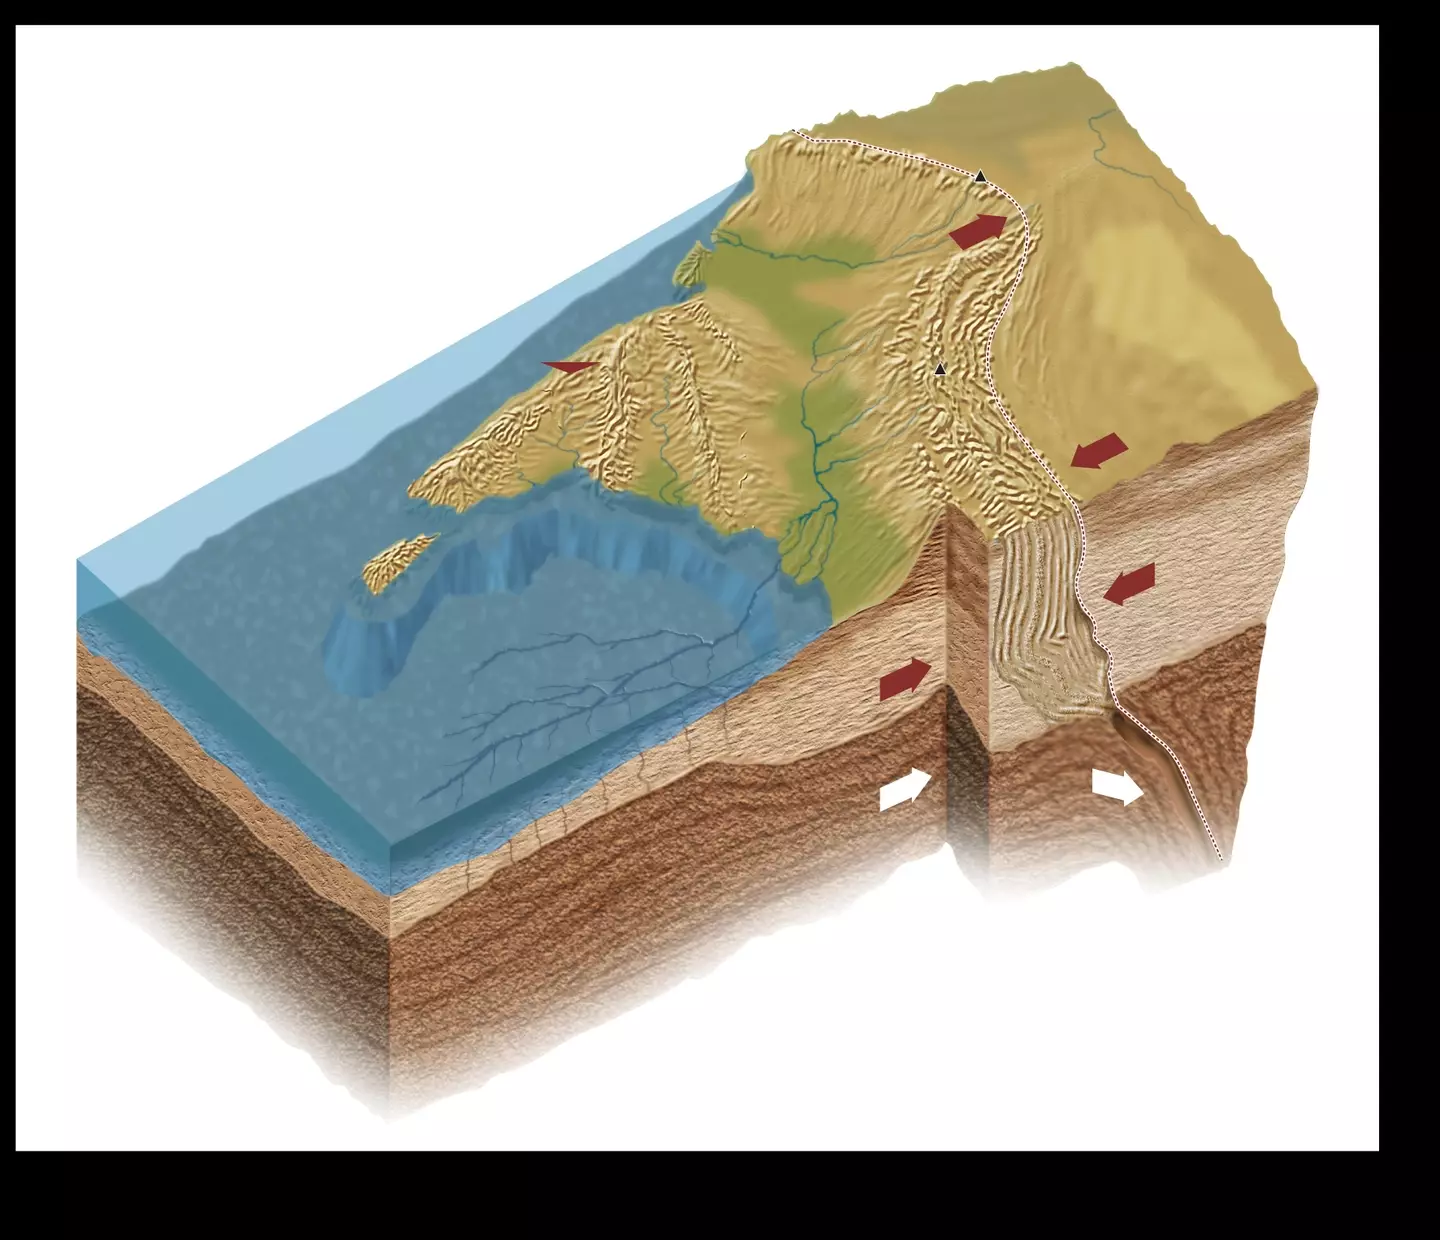 The study focuses on the Indian tectonic plate.